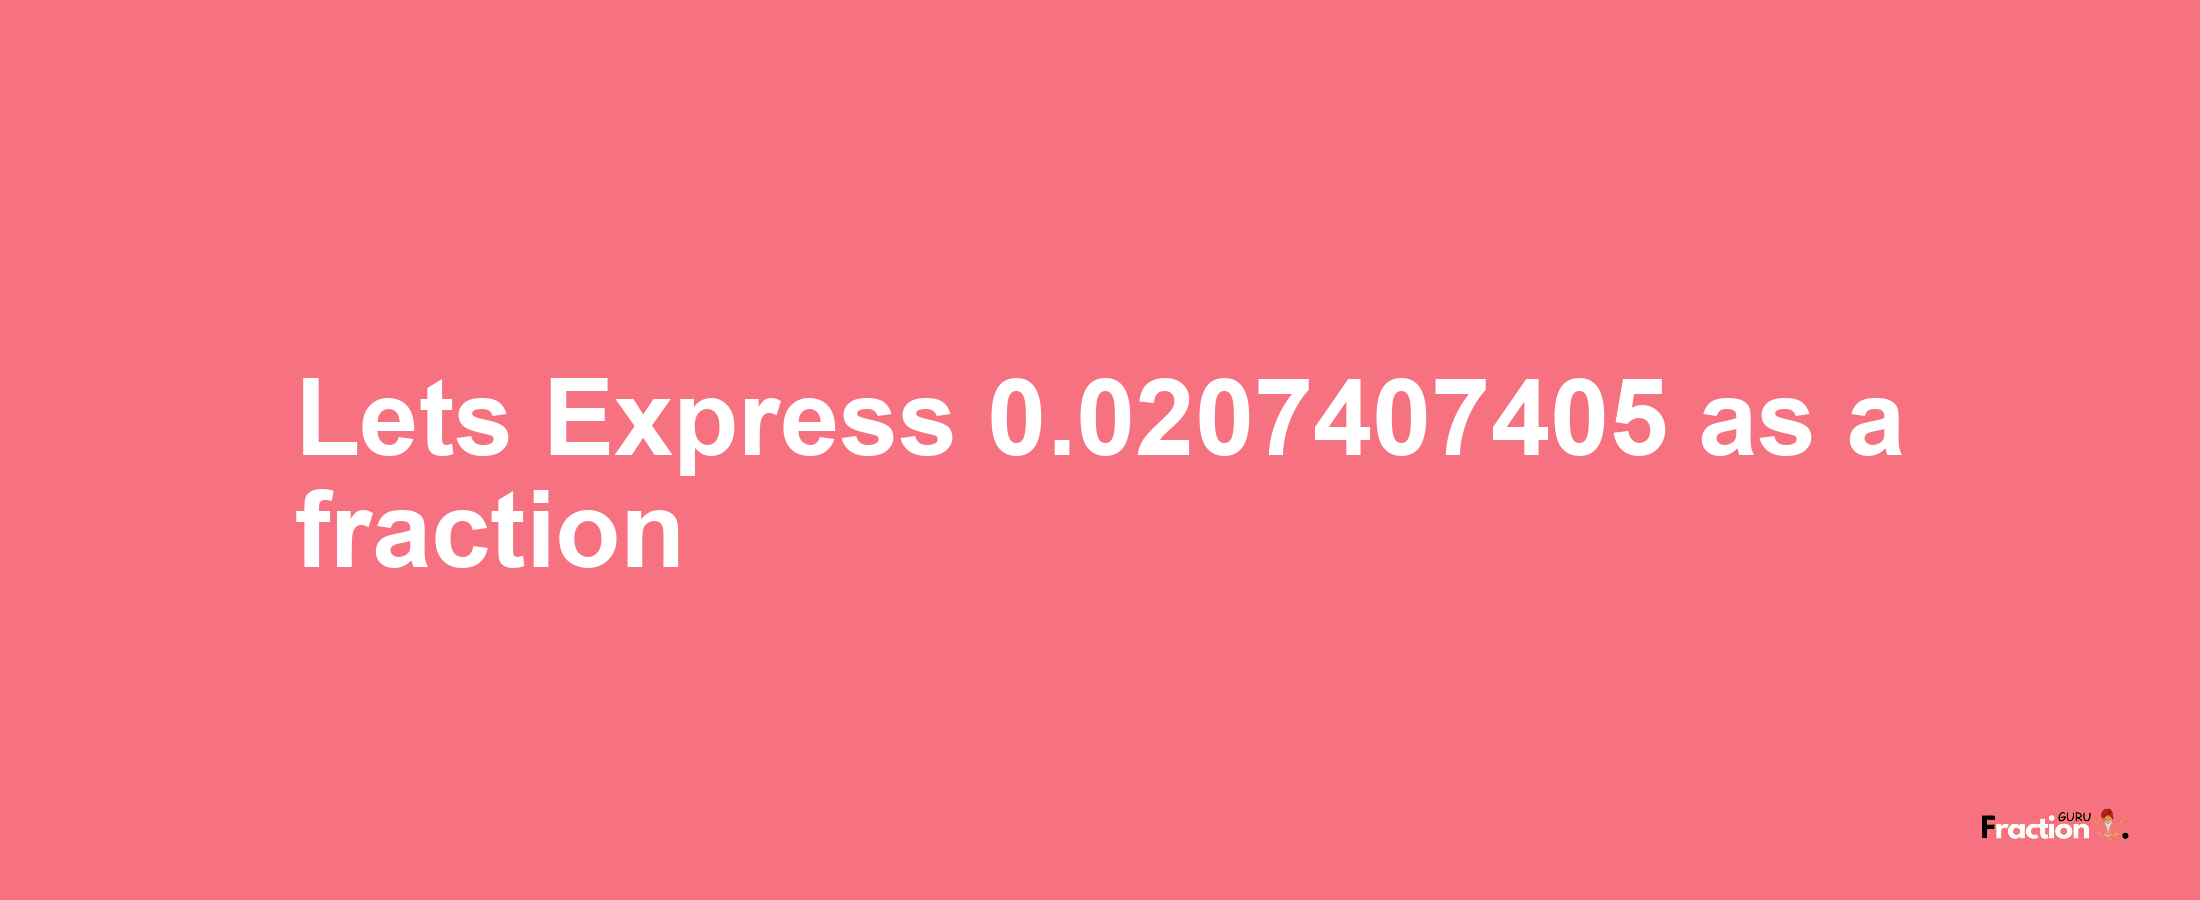 Lets Express 0.0207407405 as afraction